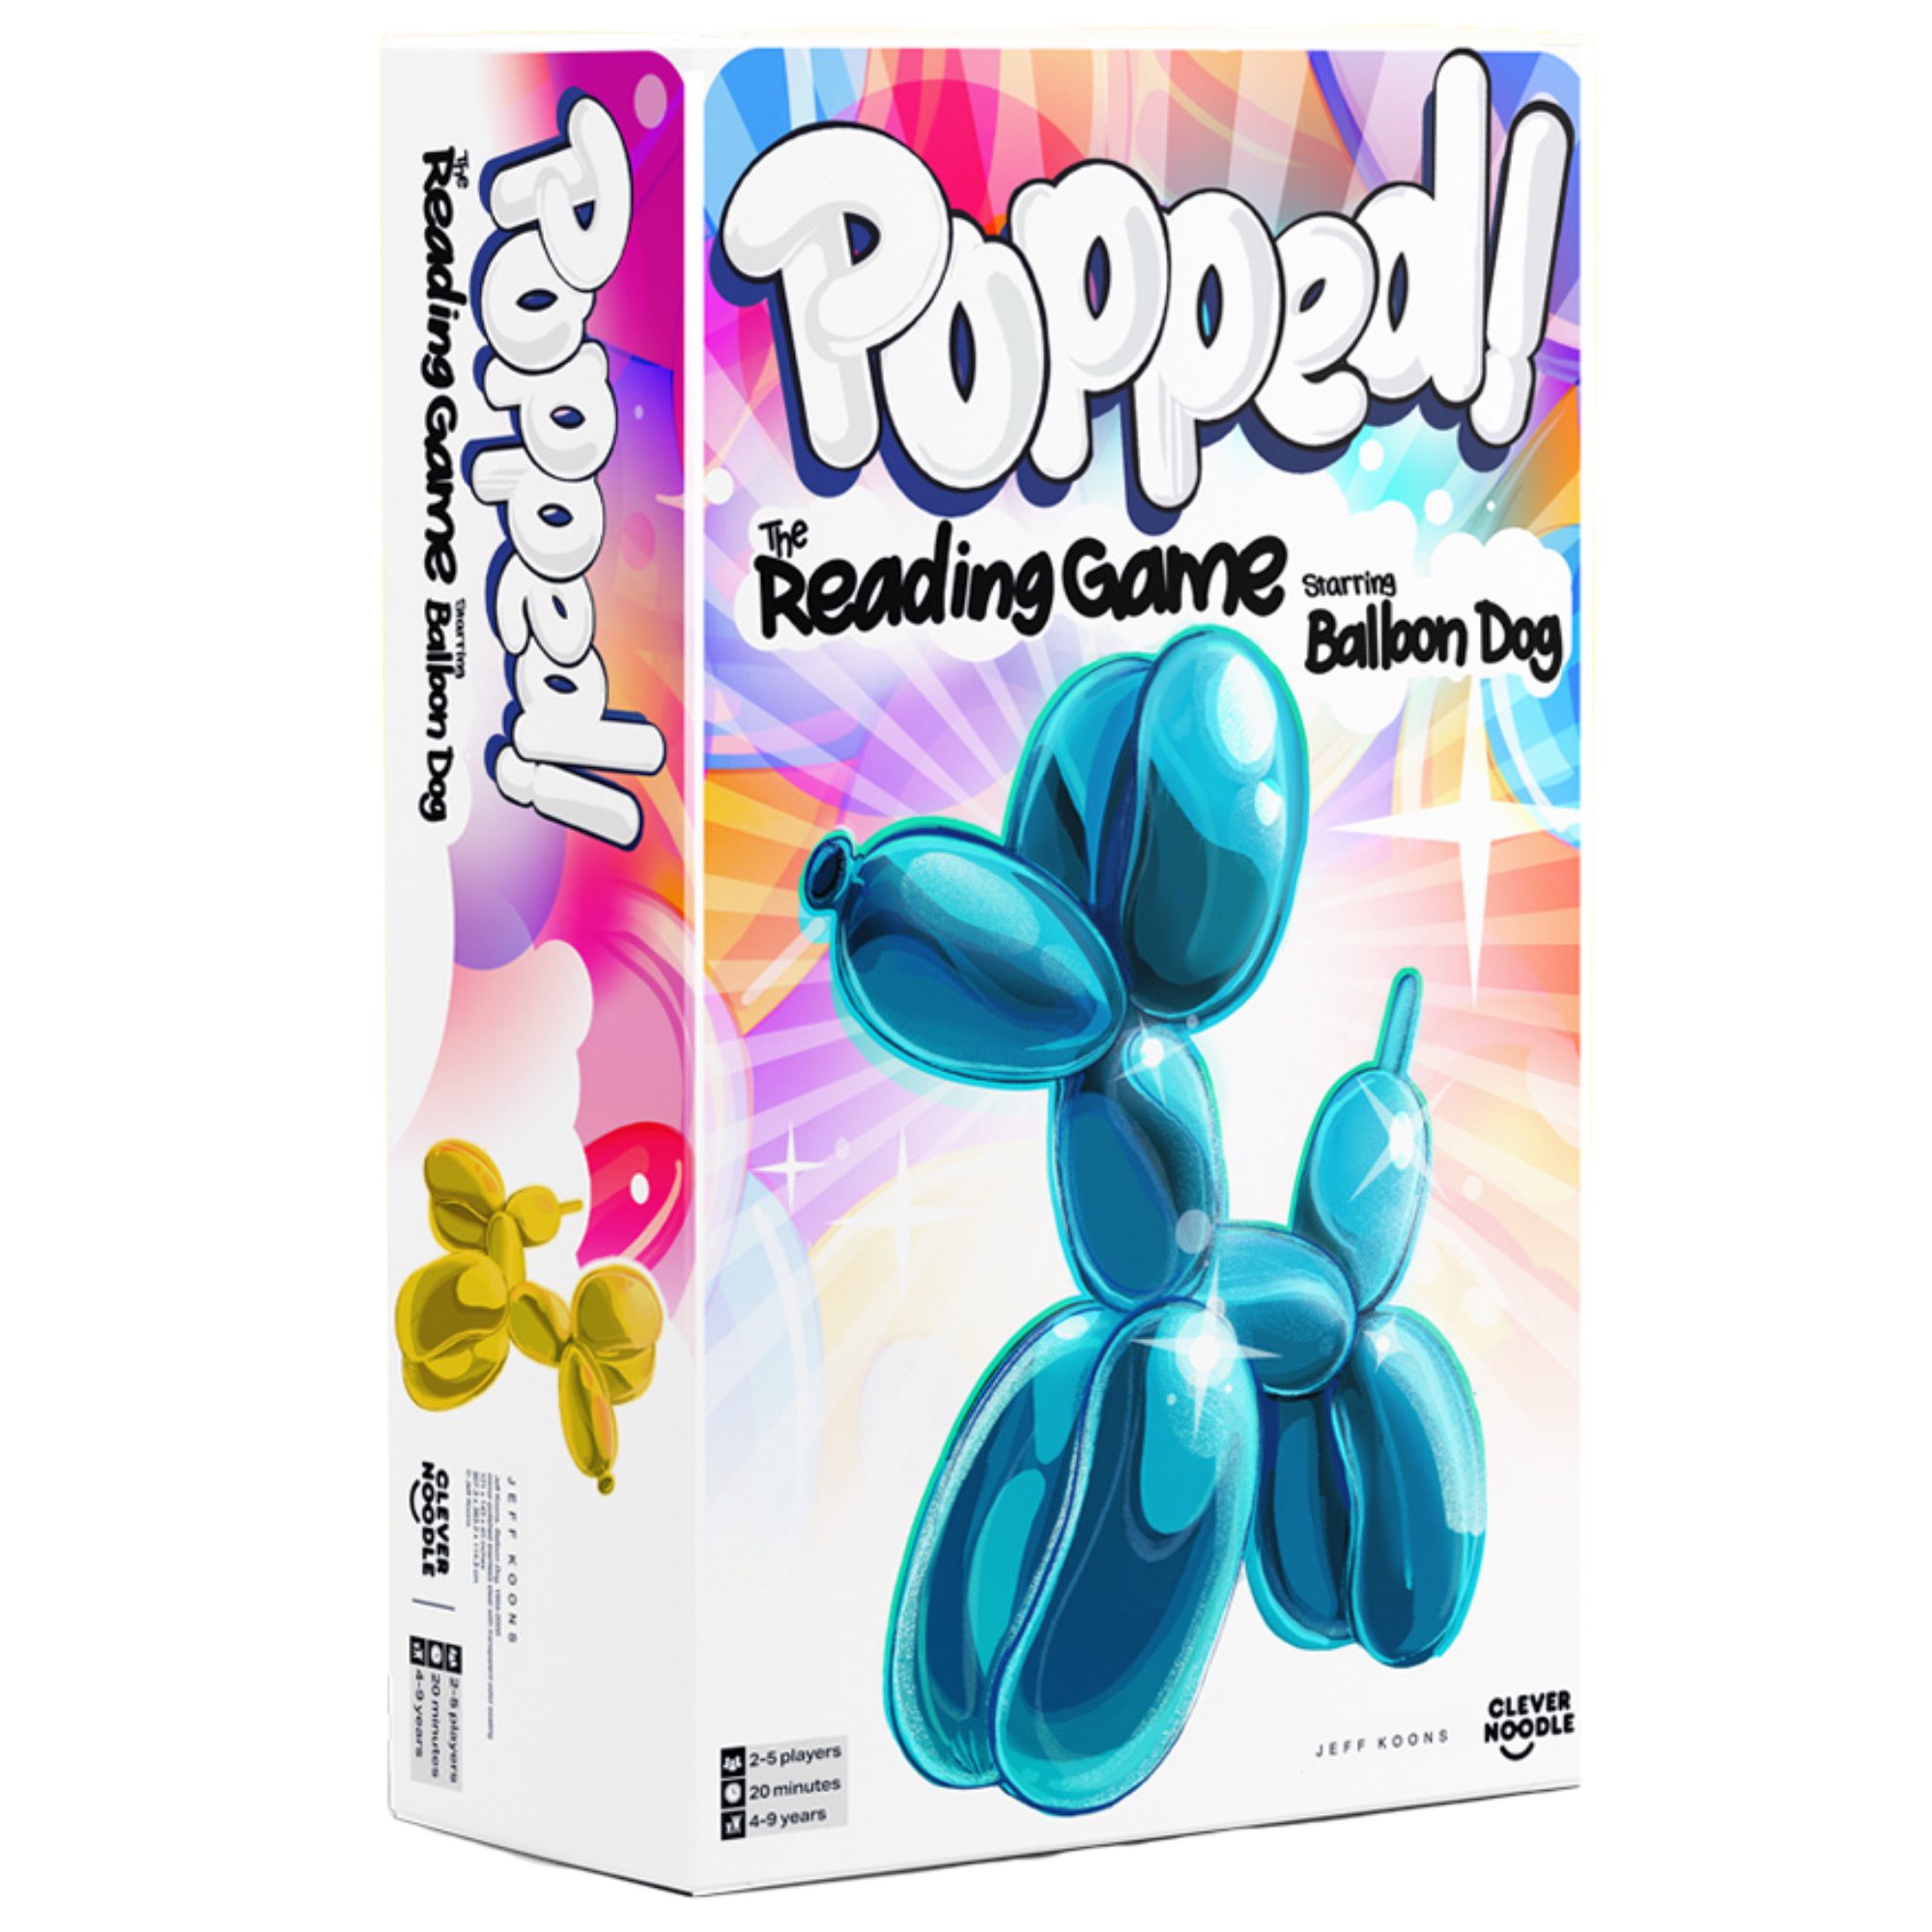 Popped! The Reading Game box art